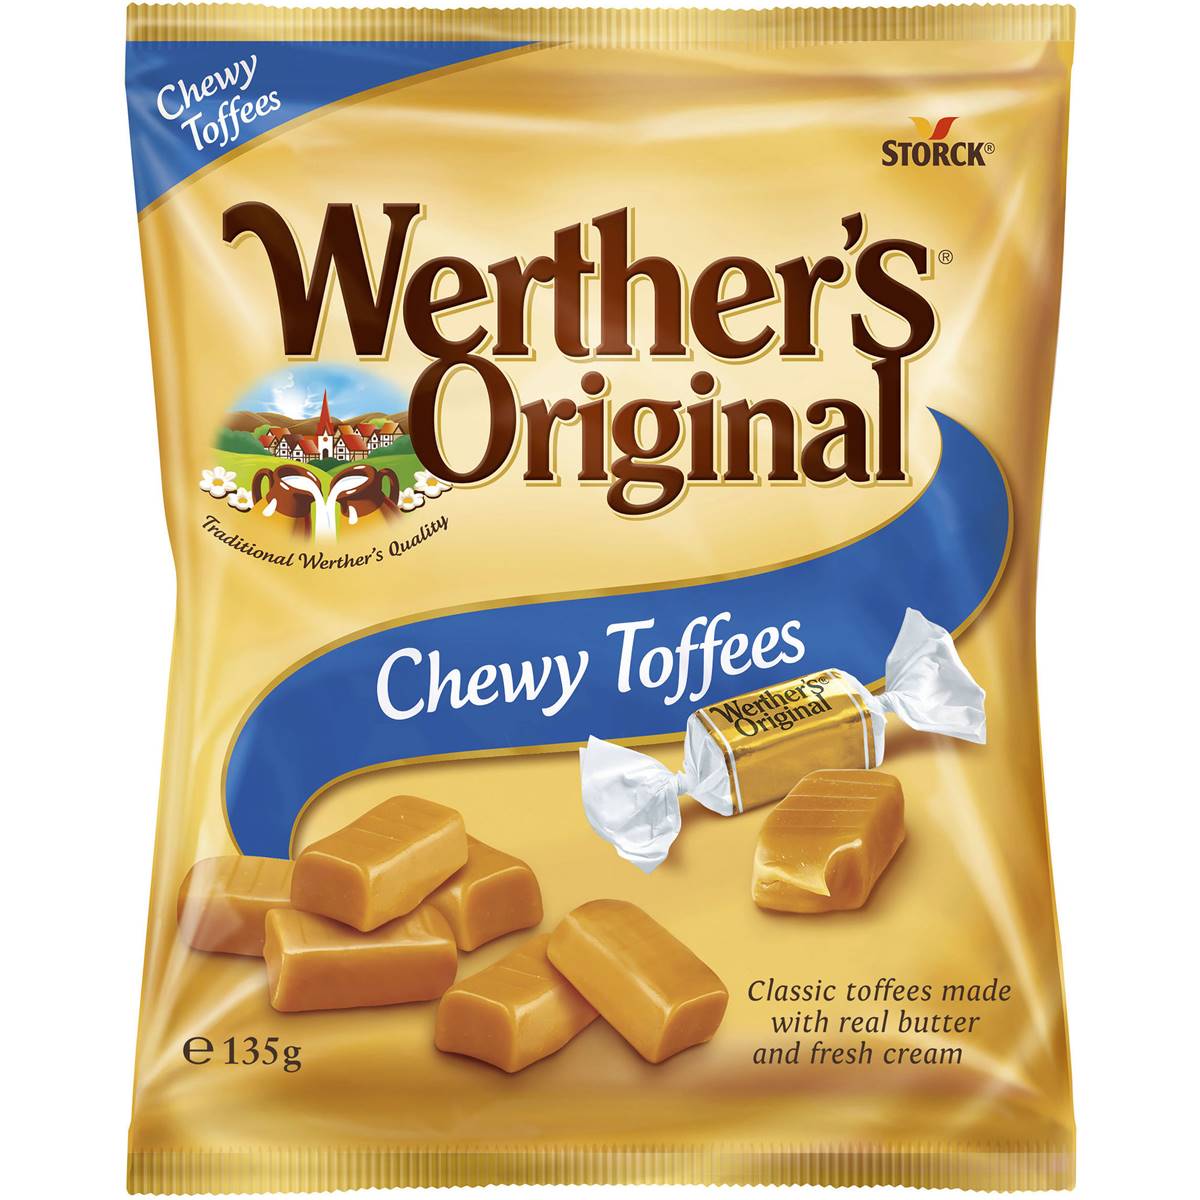 Calories in Werther's Original Chewy Toffees